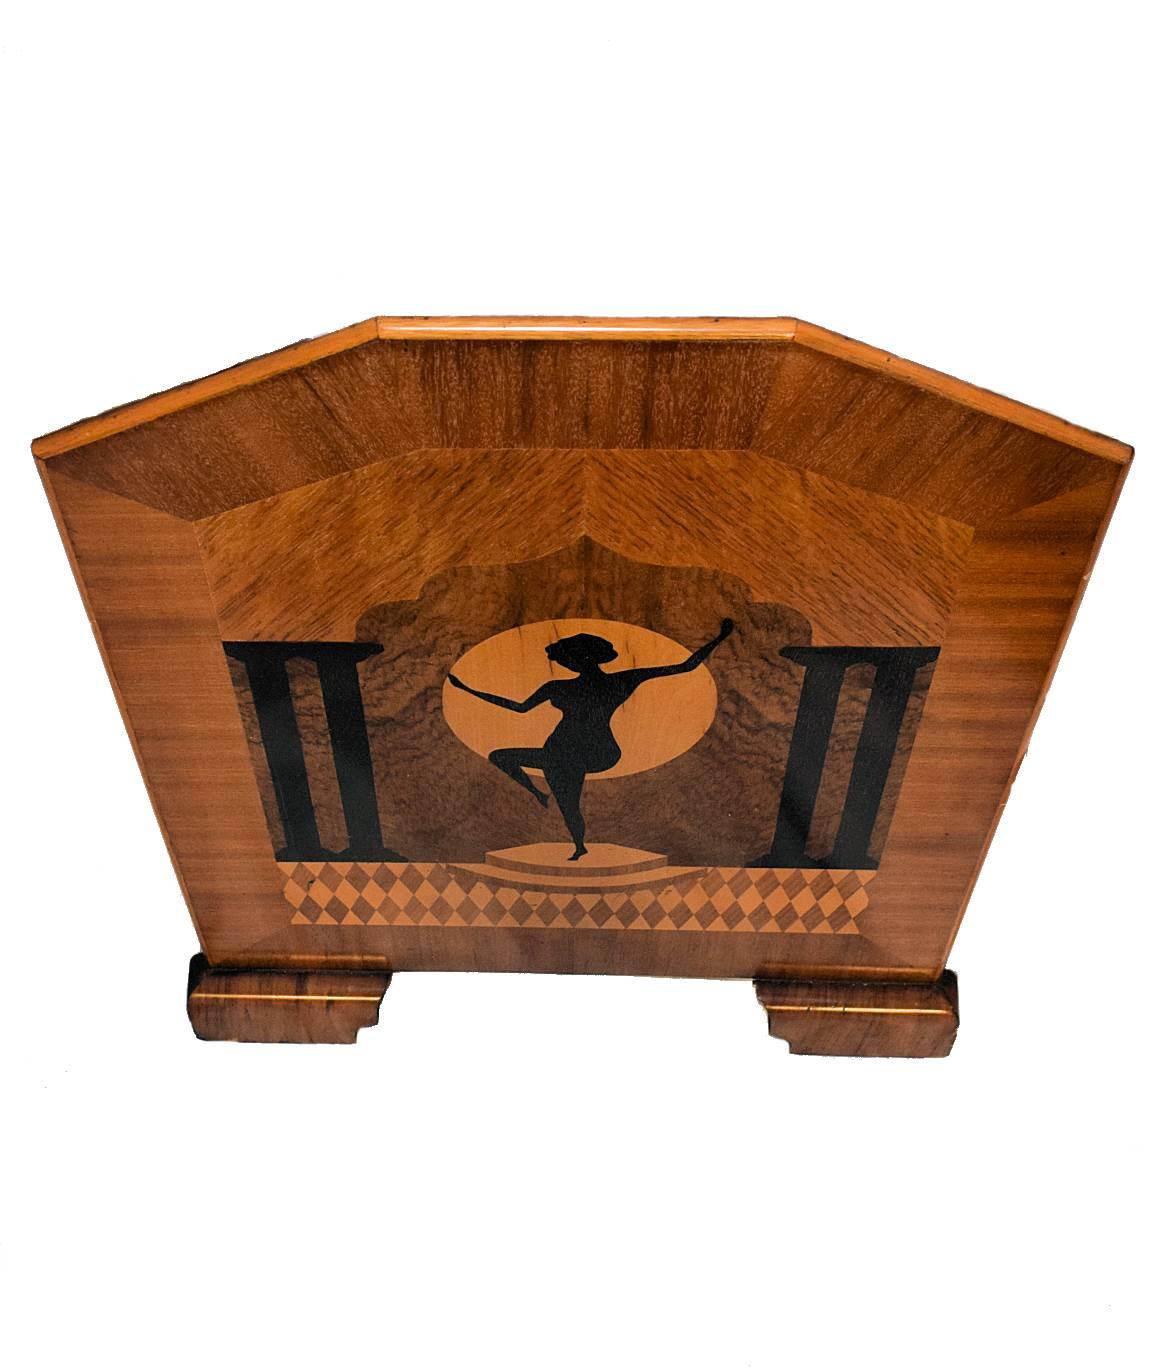 Delightful 1930s Art Deco English fire guard screen. Veneered in varying woods including walnut, maple veneer with applied decorative motif depicting a lady in a dance pose. This screen will make a wonderful featured piece any where in the home.